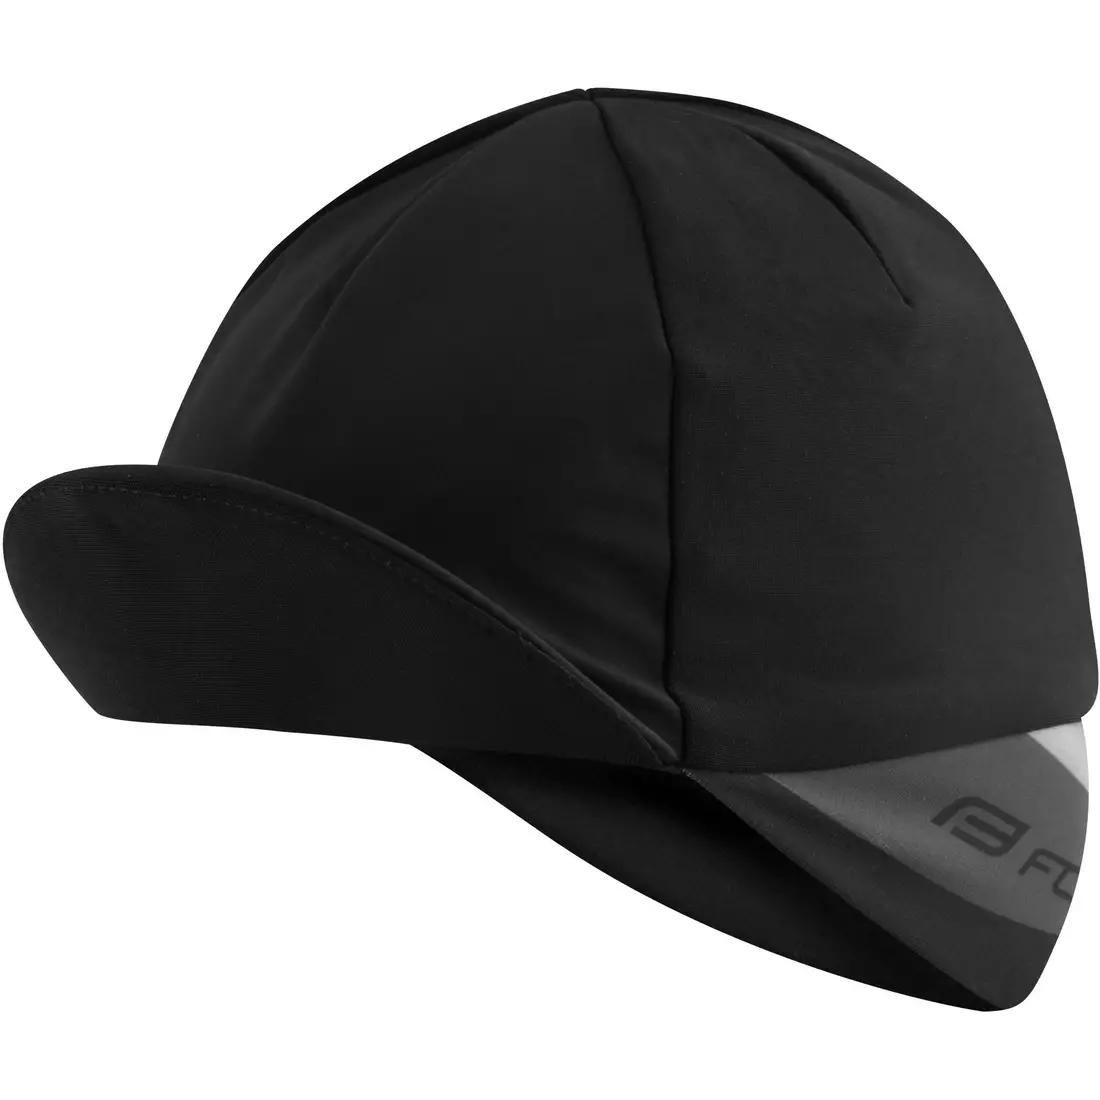 FORCE Winter cycling hat BRISK, black and gray 903048